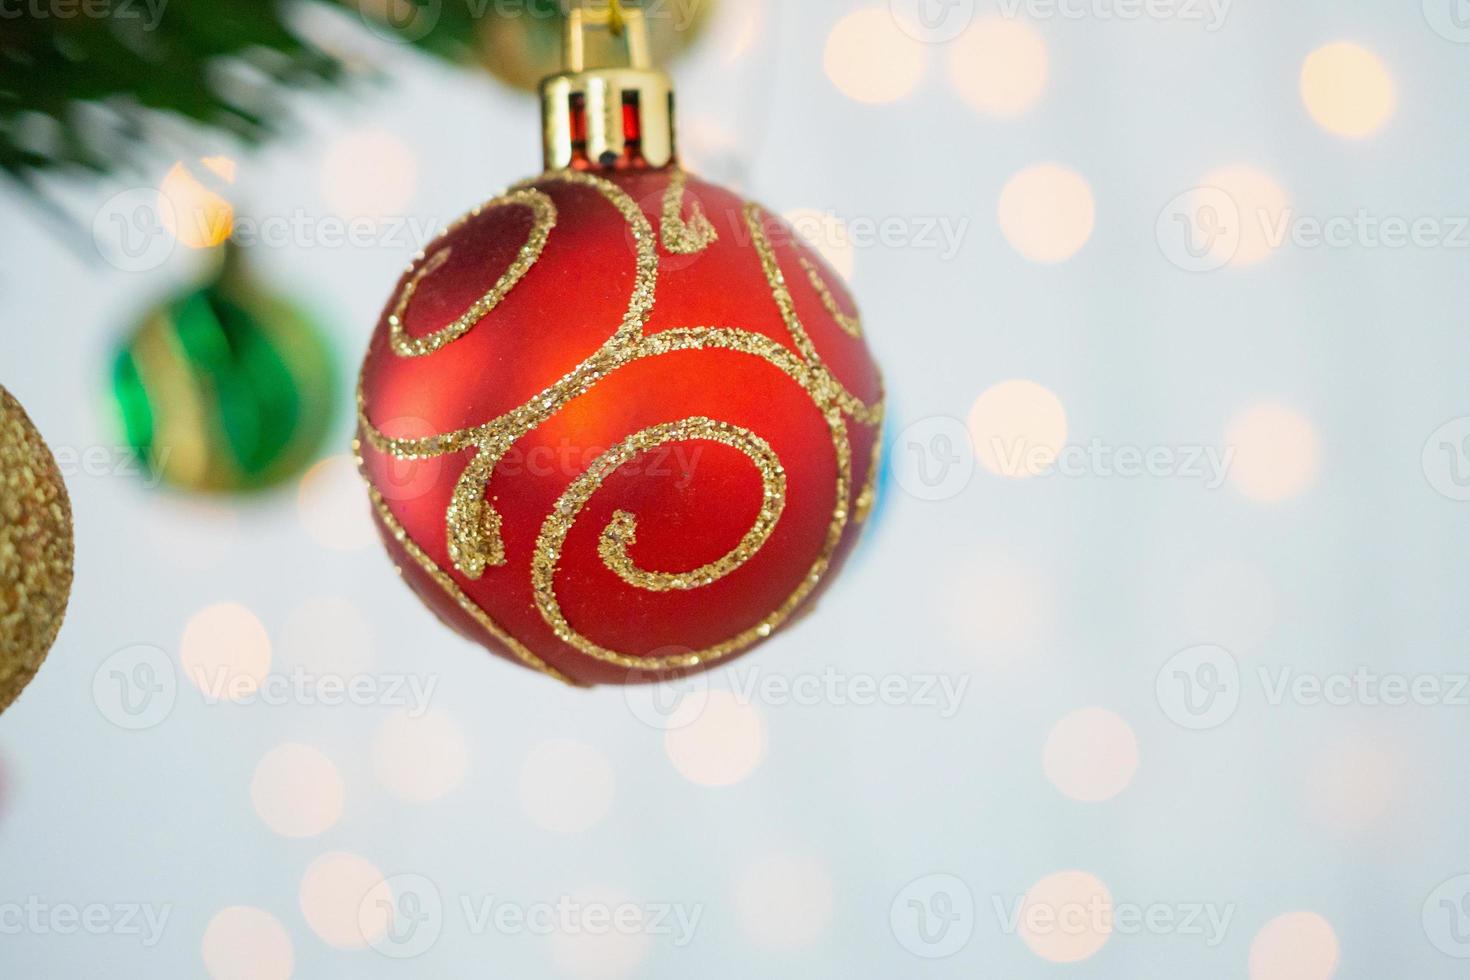 Christmas tree decorated with red ball on pine branches background photo